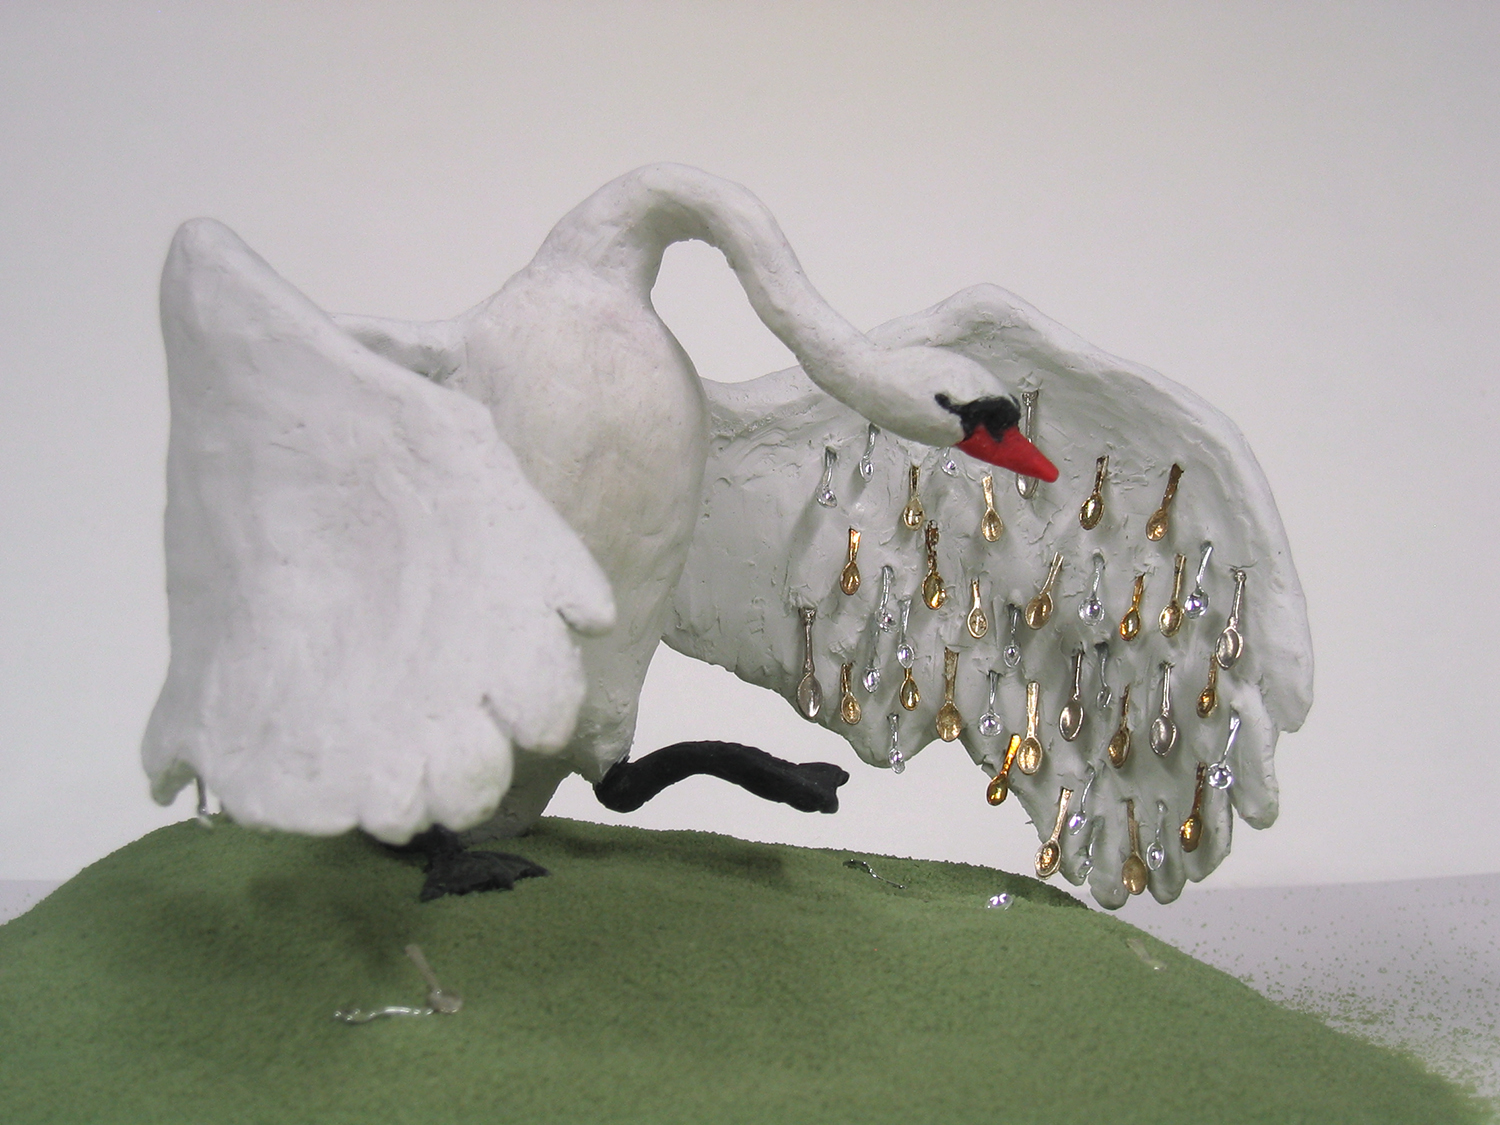   Spoon-feathered swan, 2008, Sculpey clay, dollhouse spoons, mixed media, 6 h x 9.5 w x 8.5 d in . 